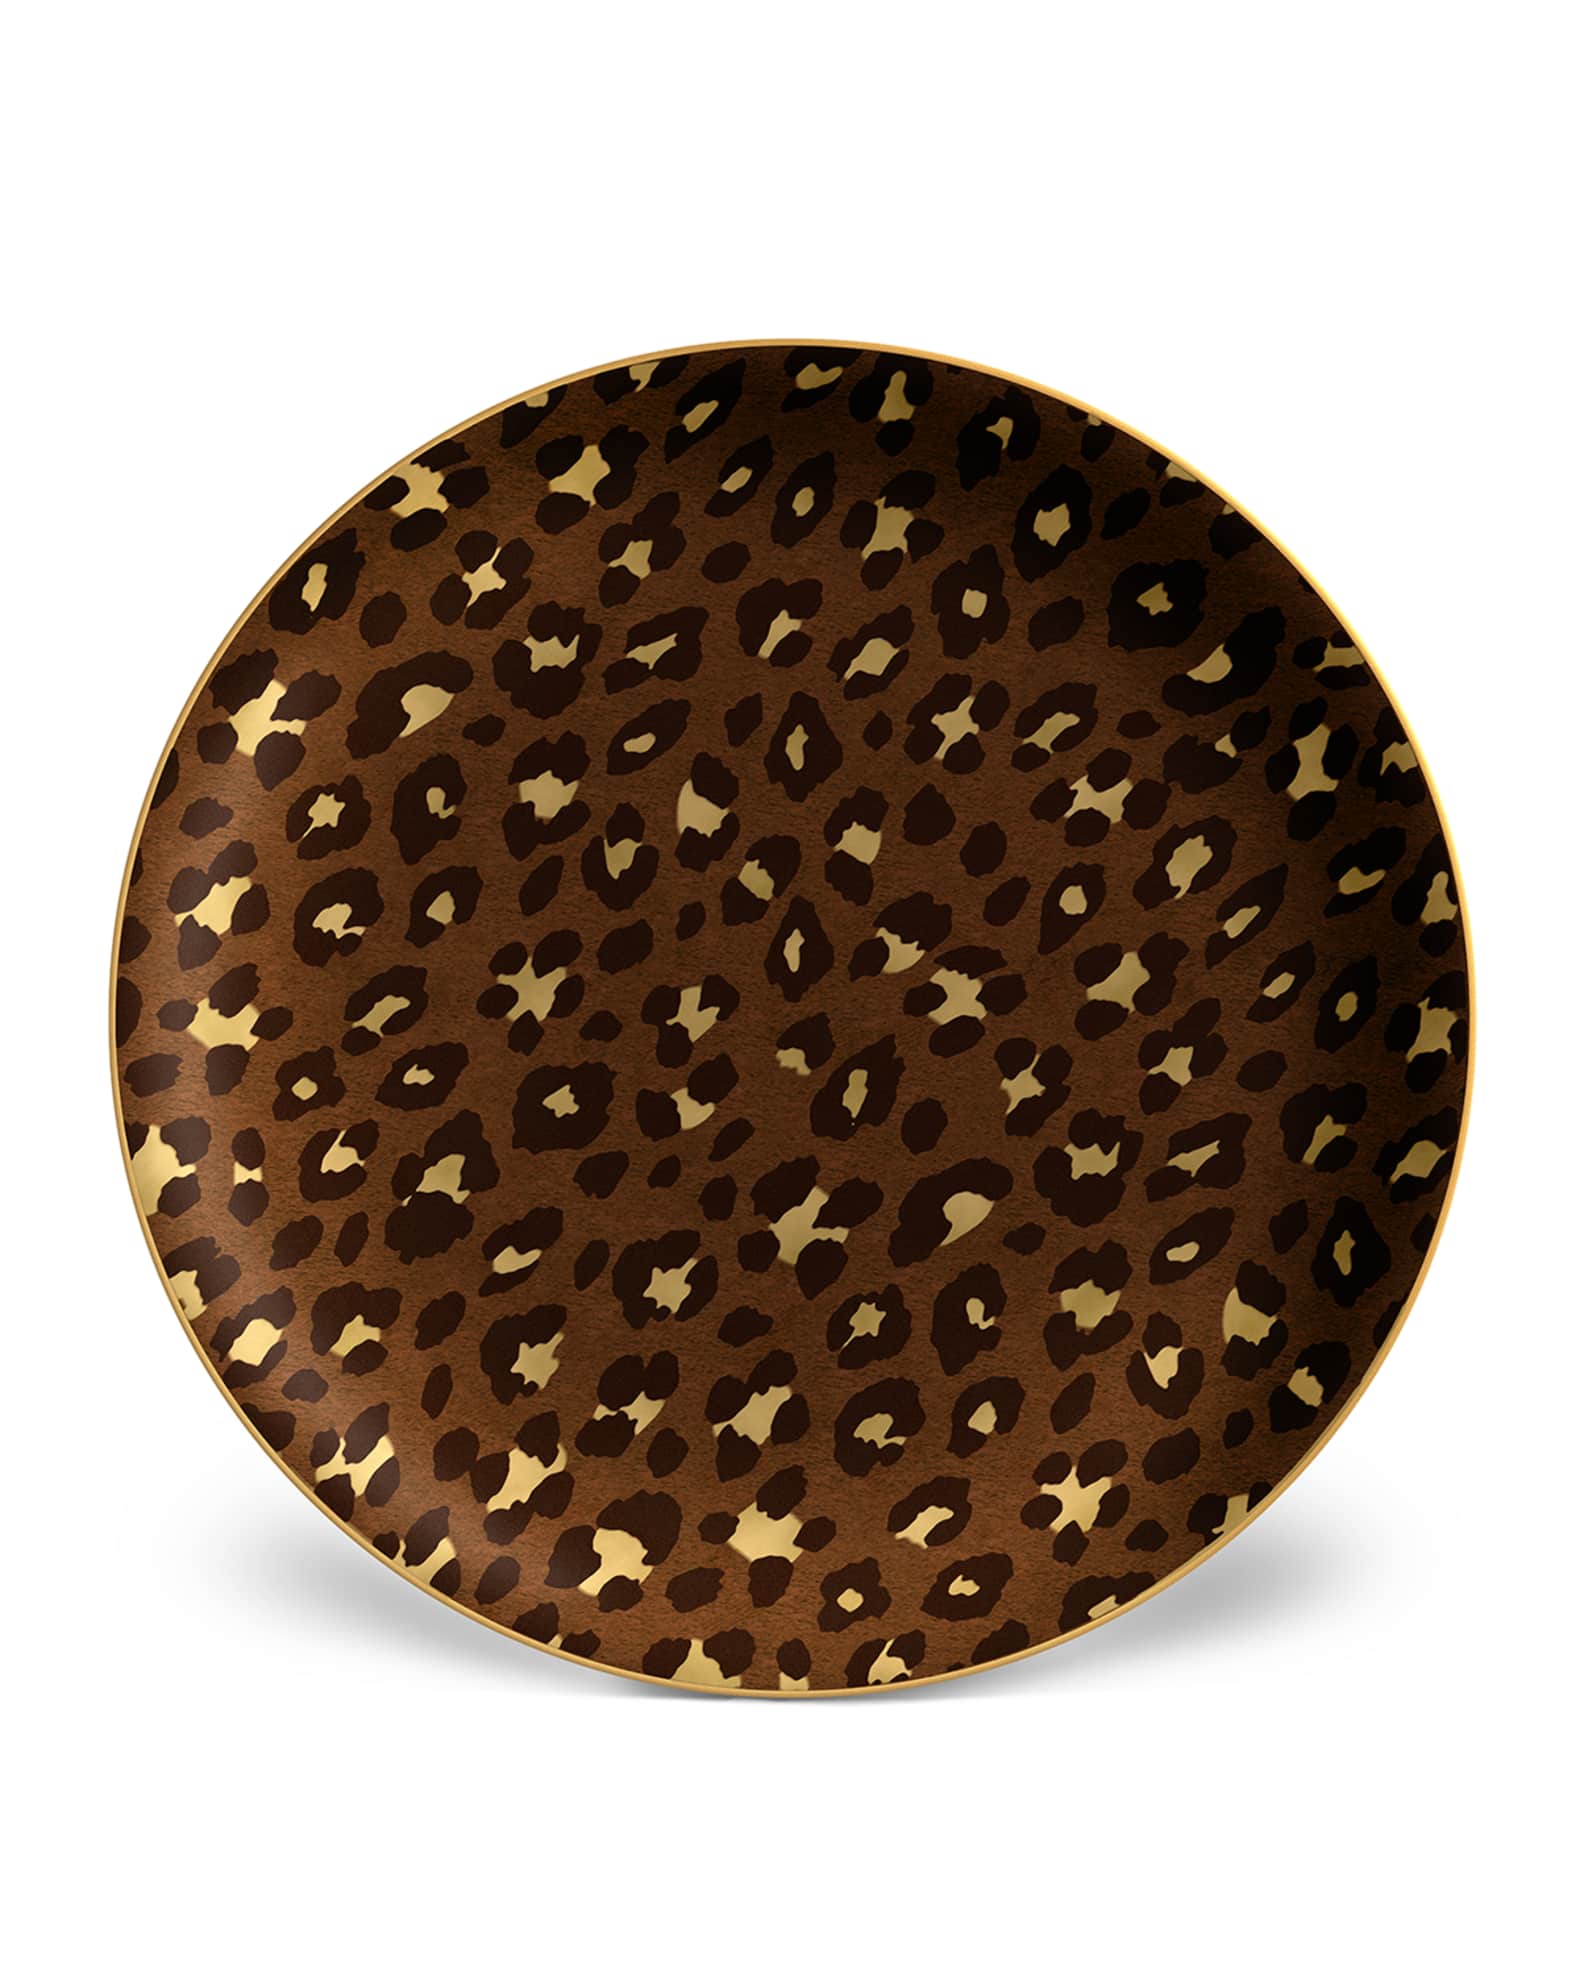 Leopard Charger/Cake Plate 0